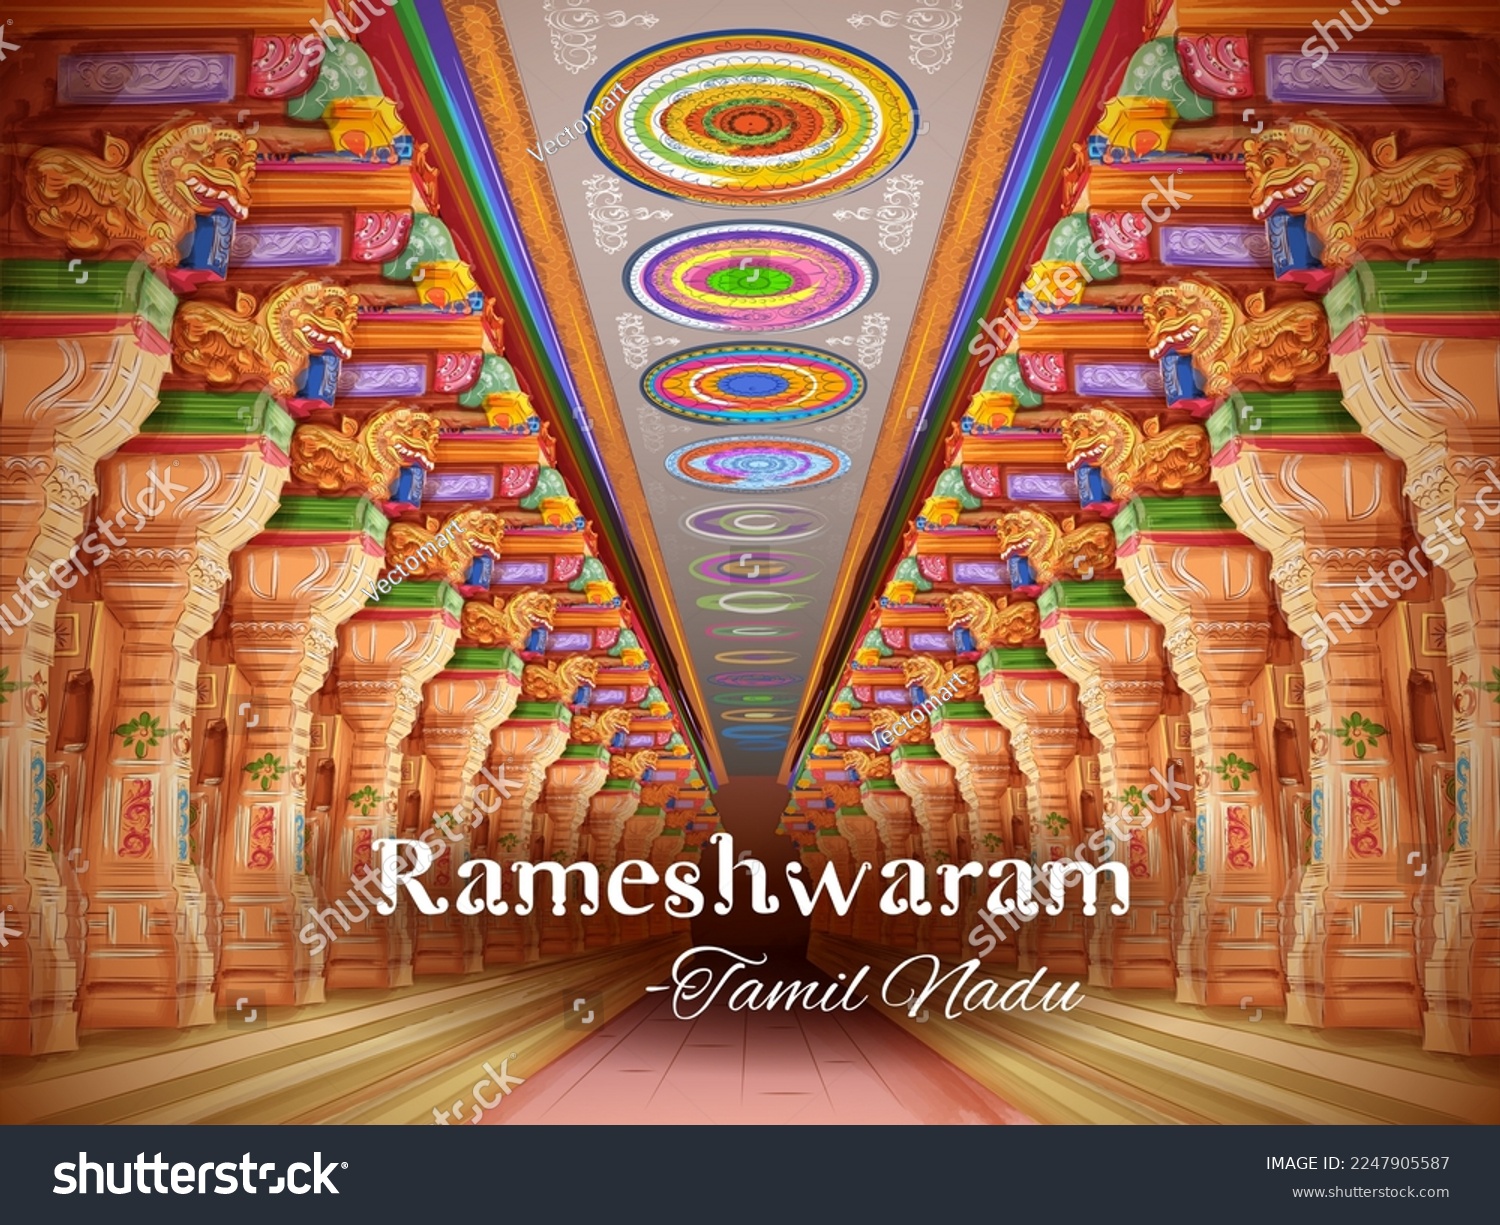 SVG of illustration of Ramanathaswamy Temple a Hindu temple of God Shiva located on Rameswaram island in the state of Tamil Nadu, India svg